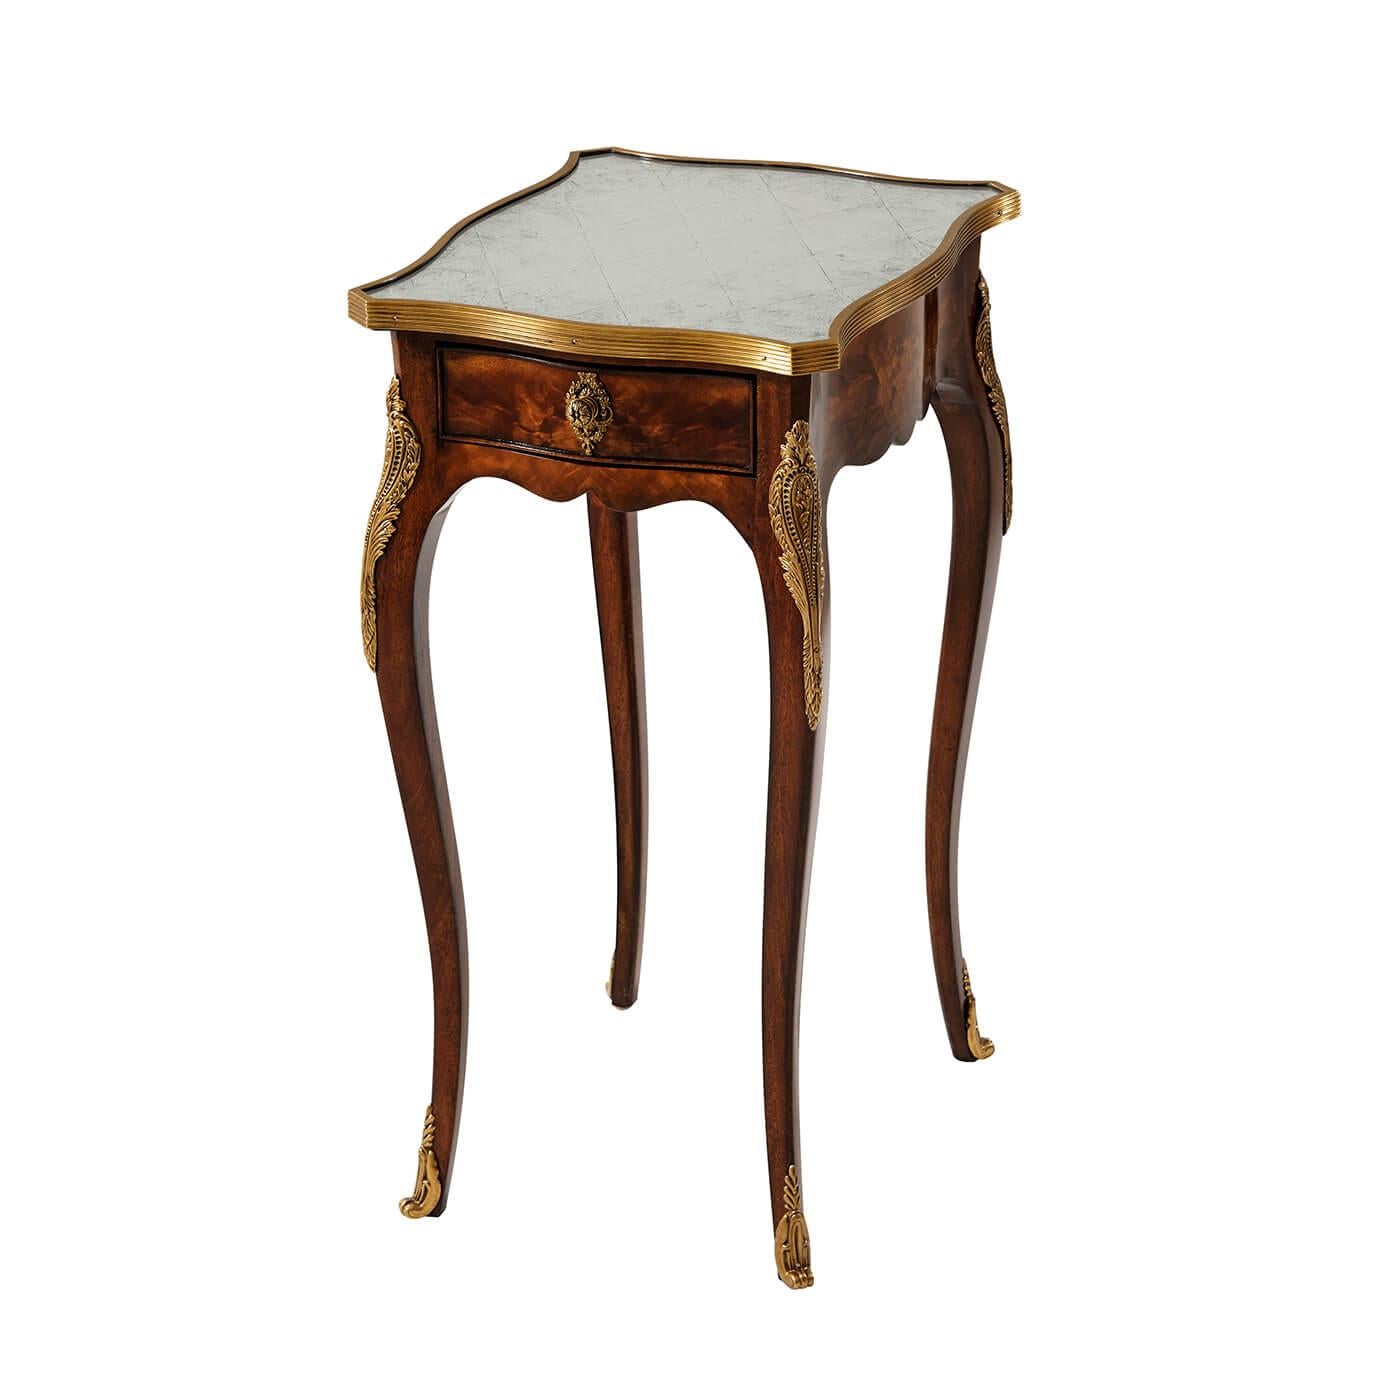 A French Louis XV style mahogany side table with fine brass mounts, the serpentine antiqued glass and brass bound top above an end drawer, on cabriole legs with sabots. The original Louis XV, circa 1760.

Dimensions: 13